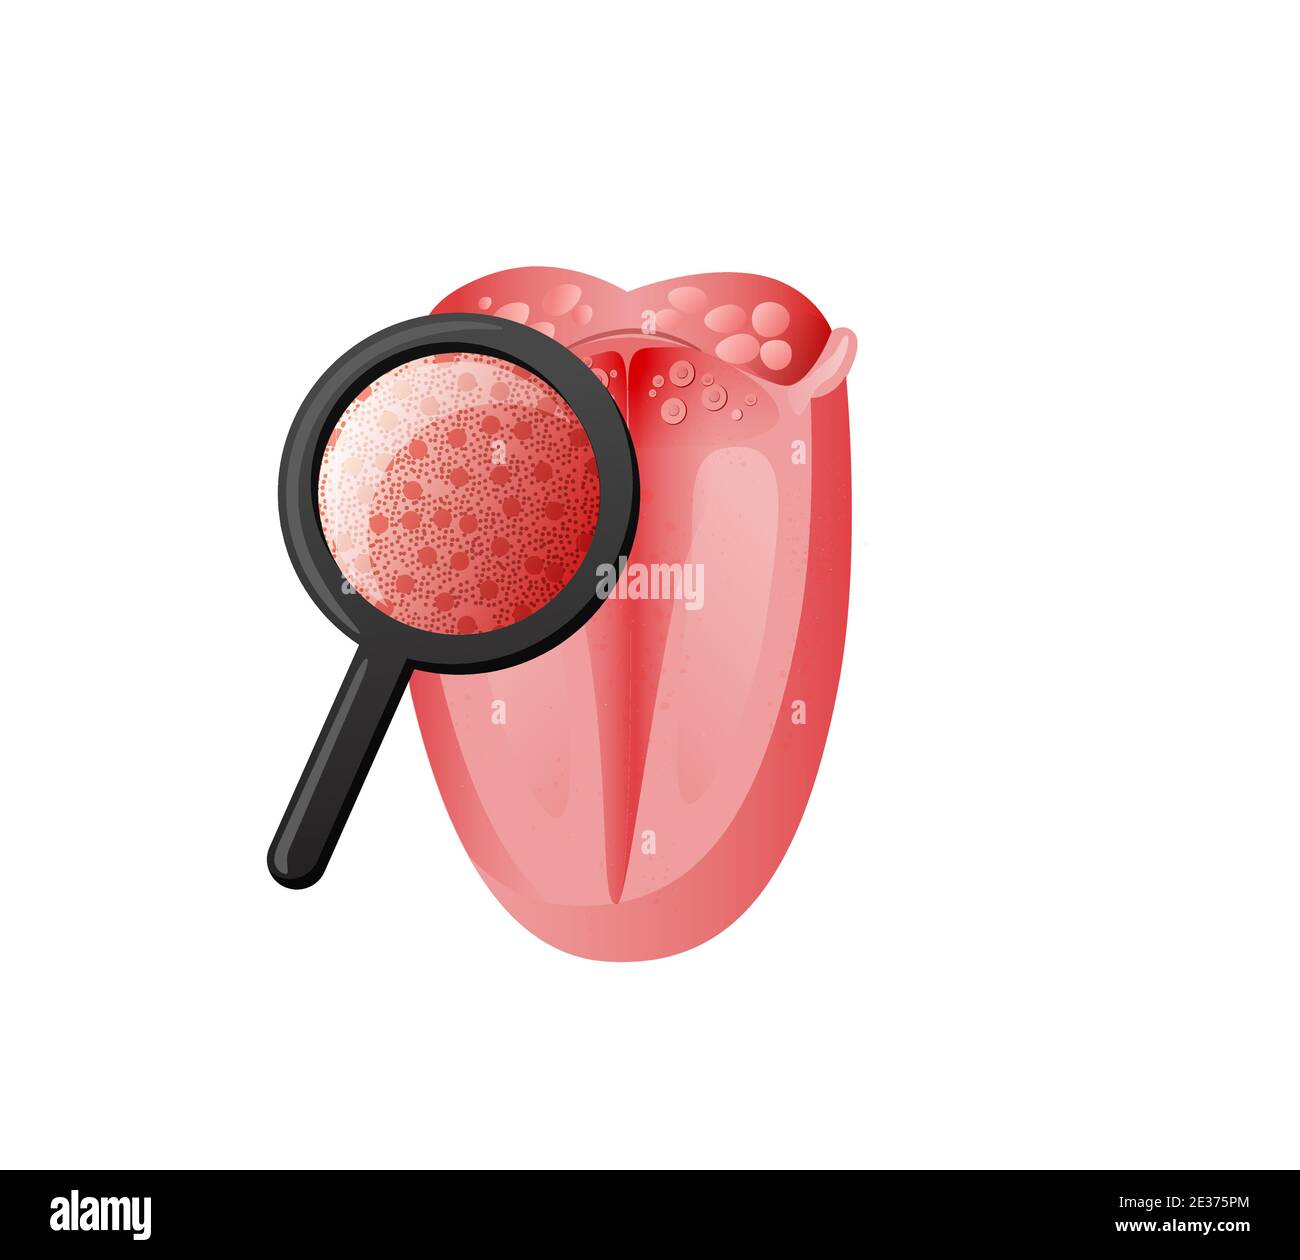 Inspection taste receptors on tongue illustration. Examination of mucous tissues under magnifying glass for presence candida. Stock Vector